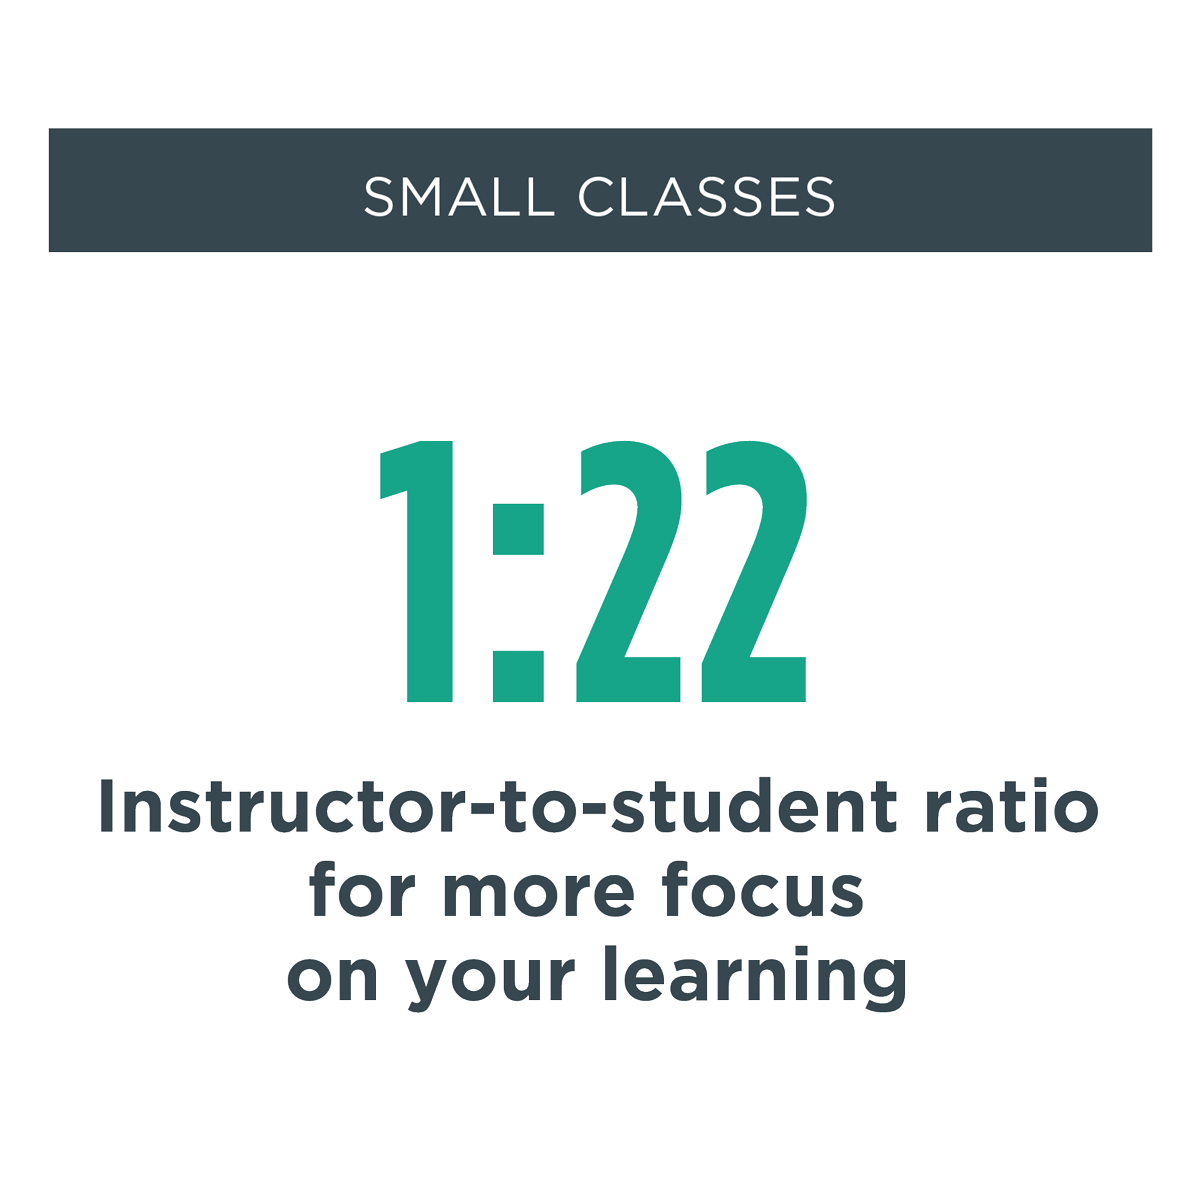 small classes - Instructor-to-student ratio provides more focus on your learning